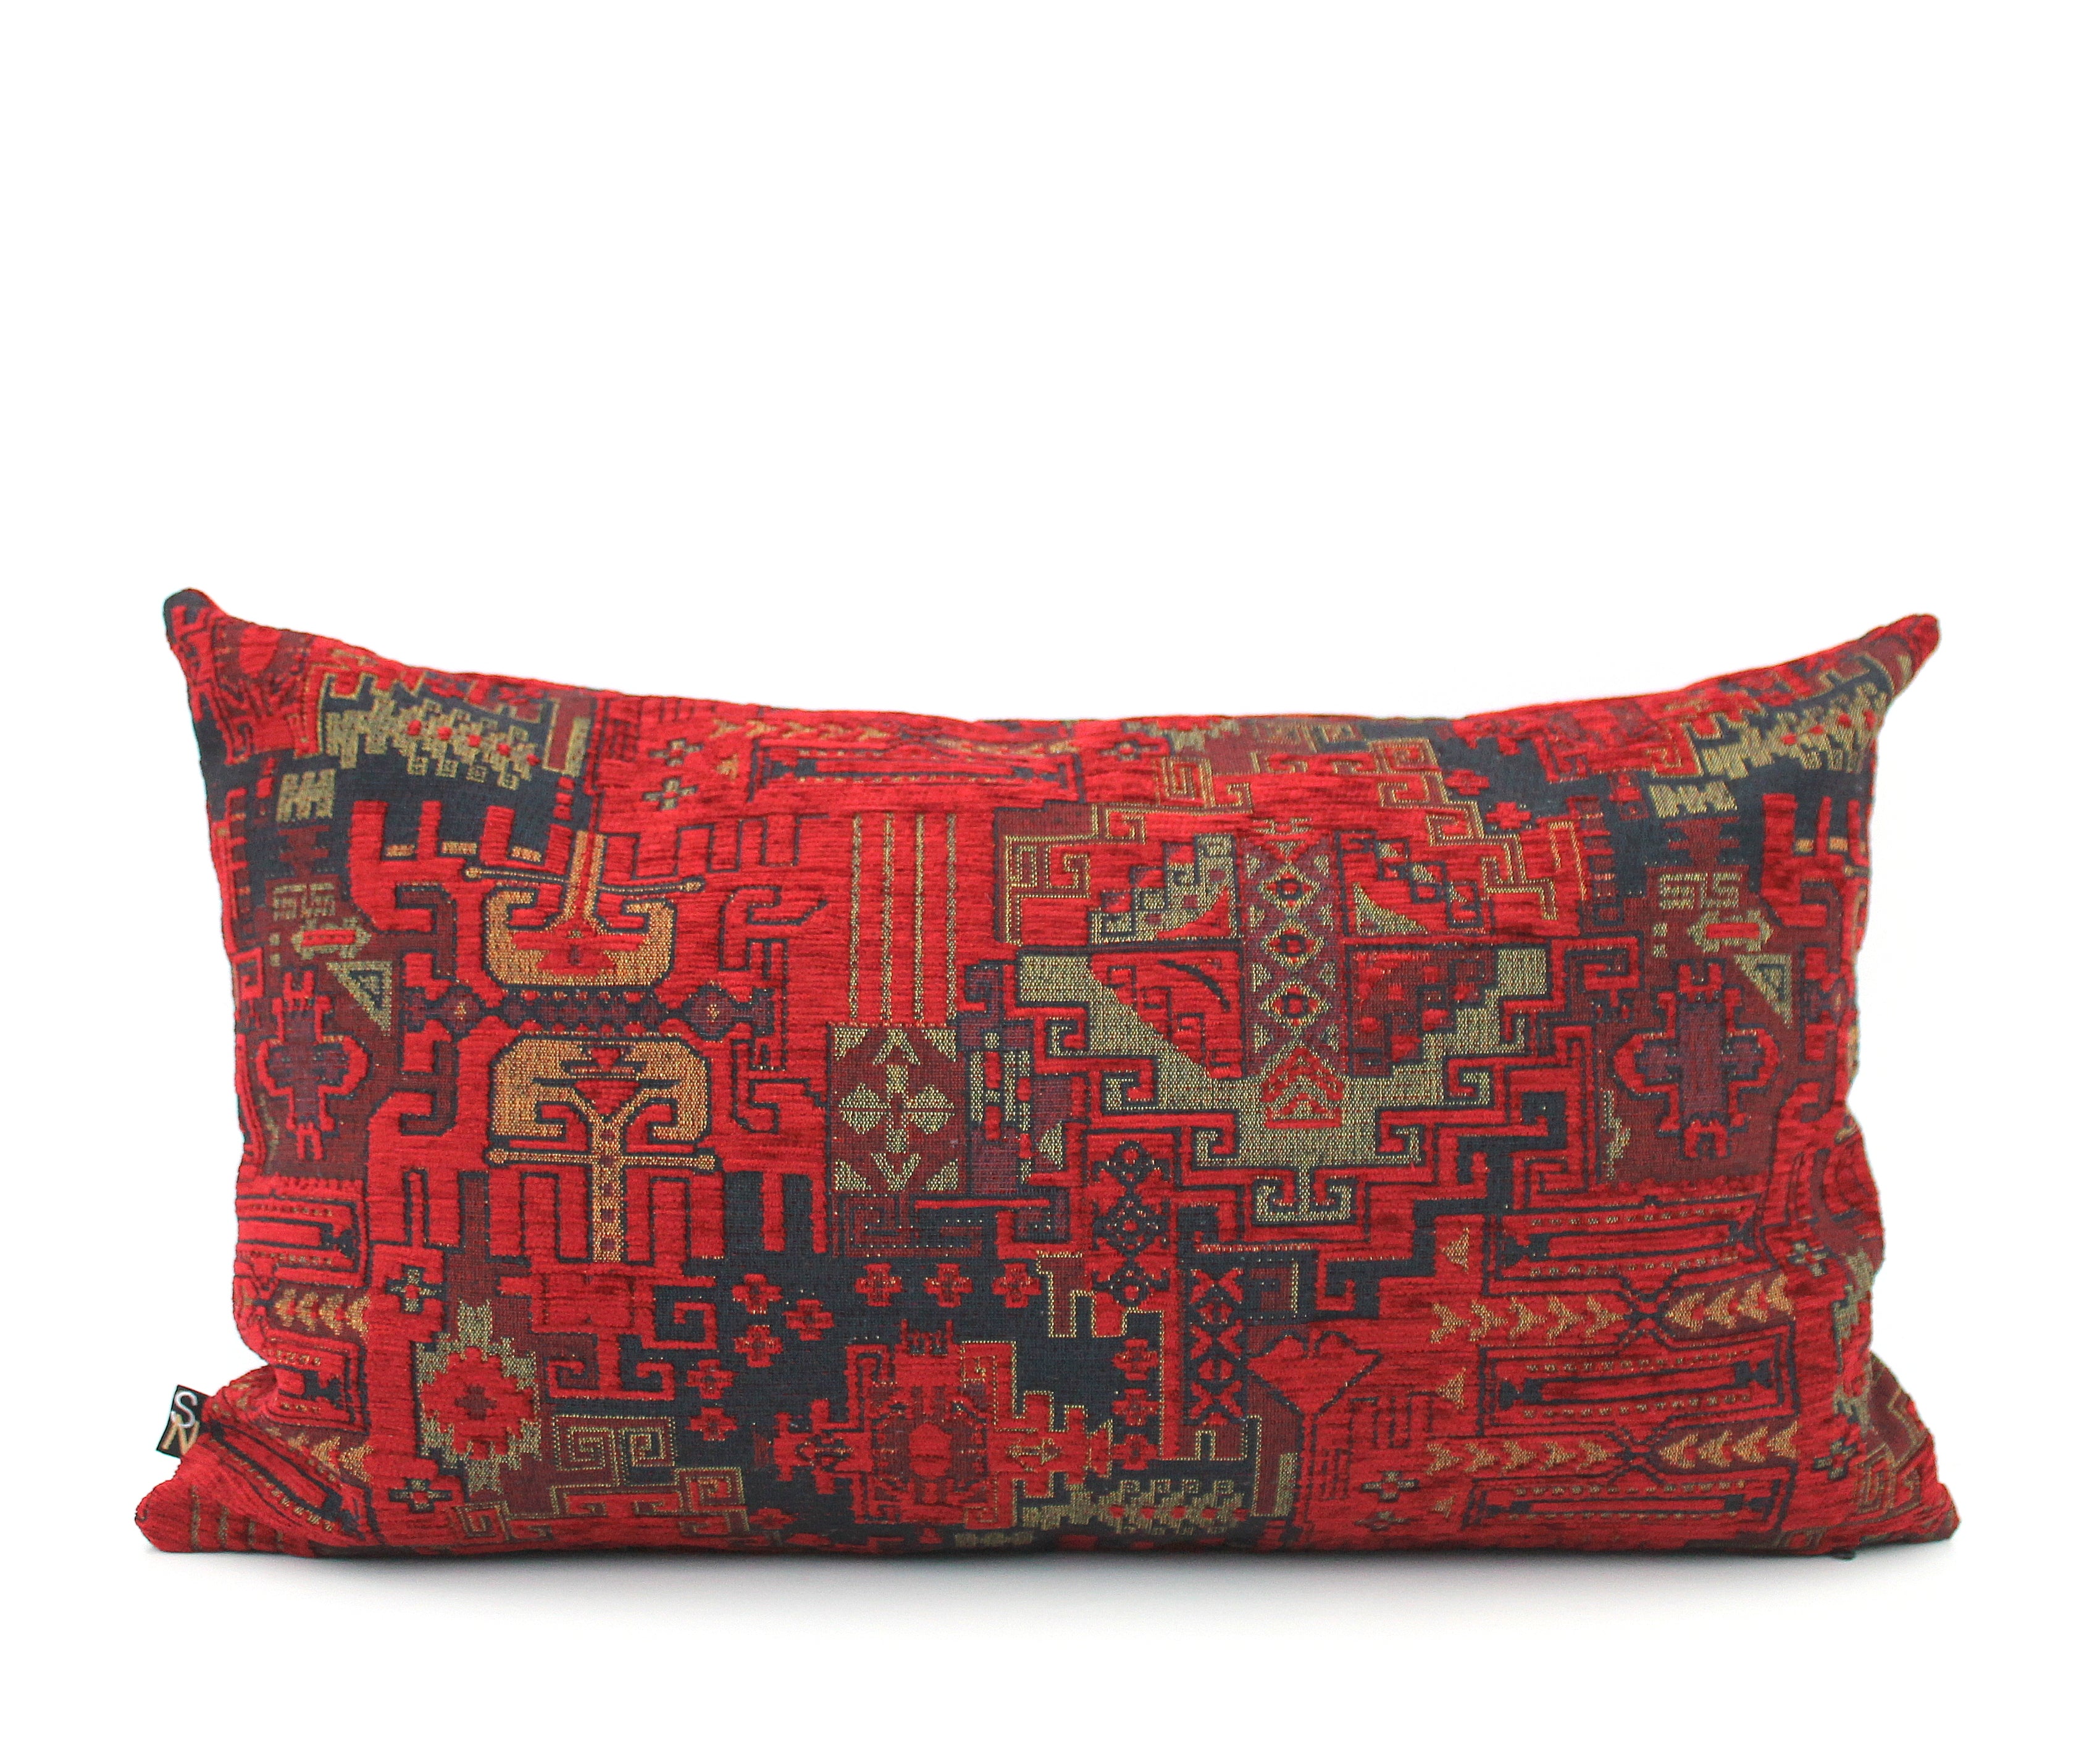 Oriental Boho pillow Kilim pillow cover Chair pillow Small O by